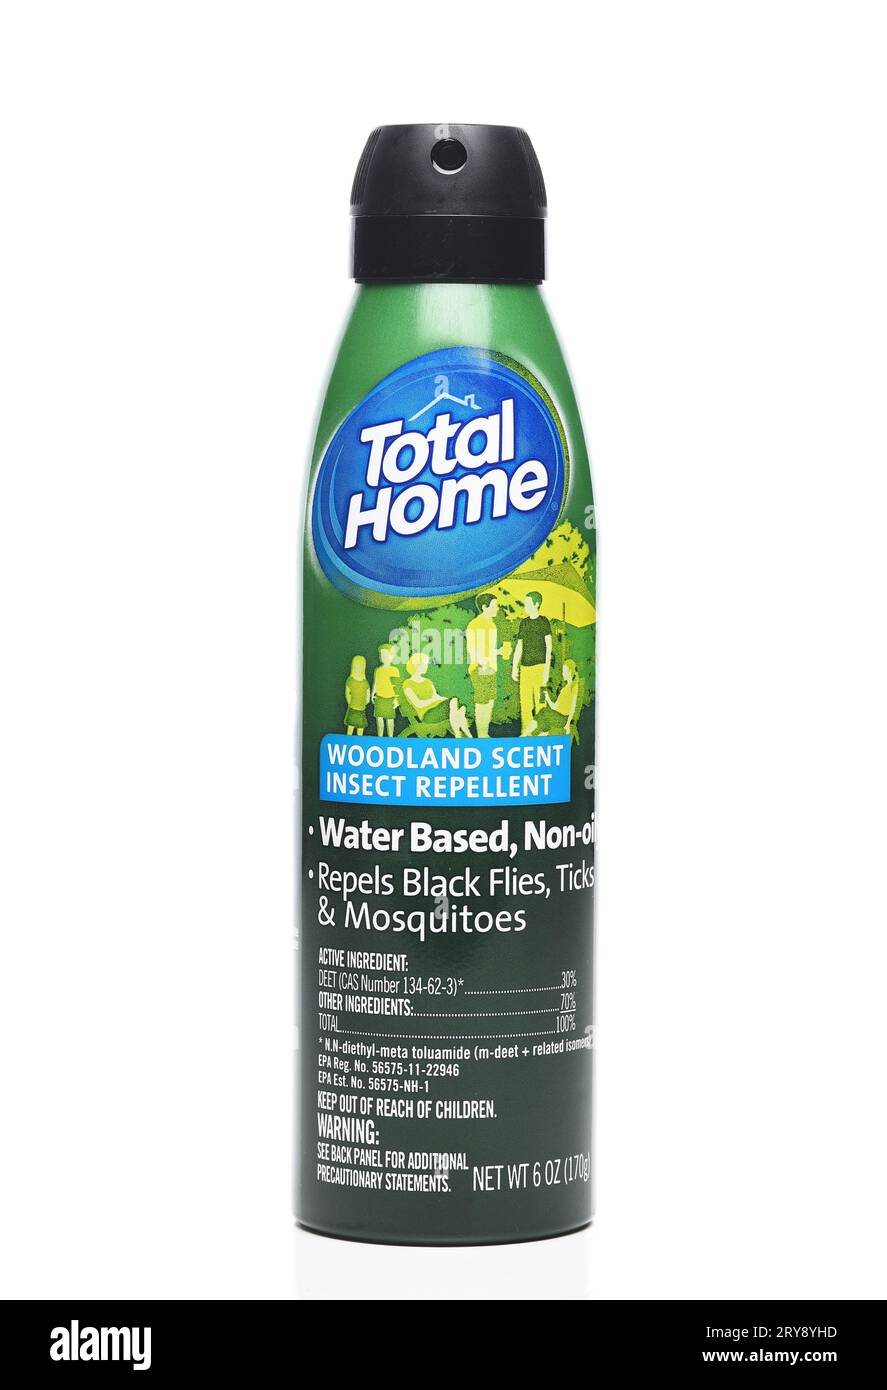 IRVINE, CALIFORNIA - 26 SEPT 2023: A can of Total Home Woodland Scent Insect Repellent. Stock Photo